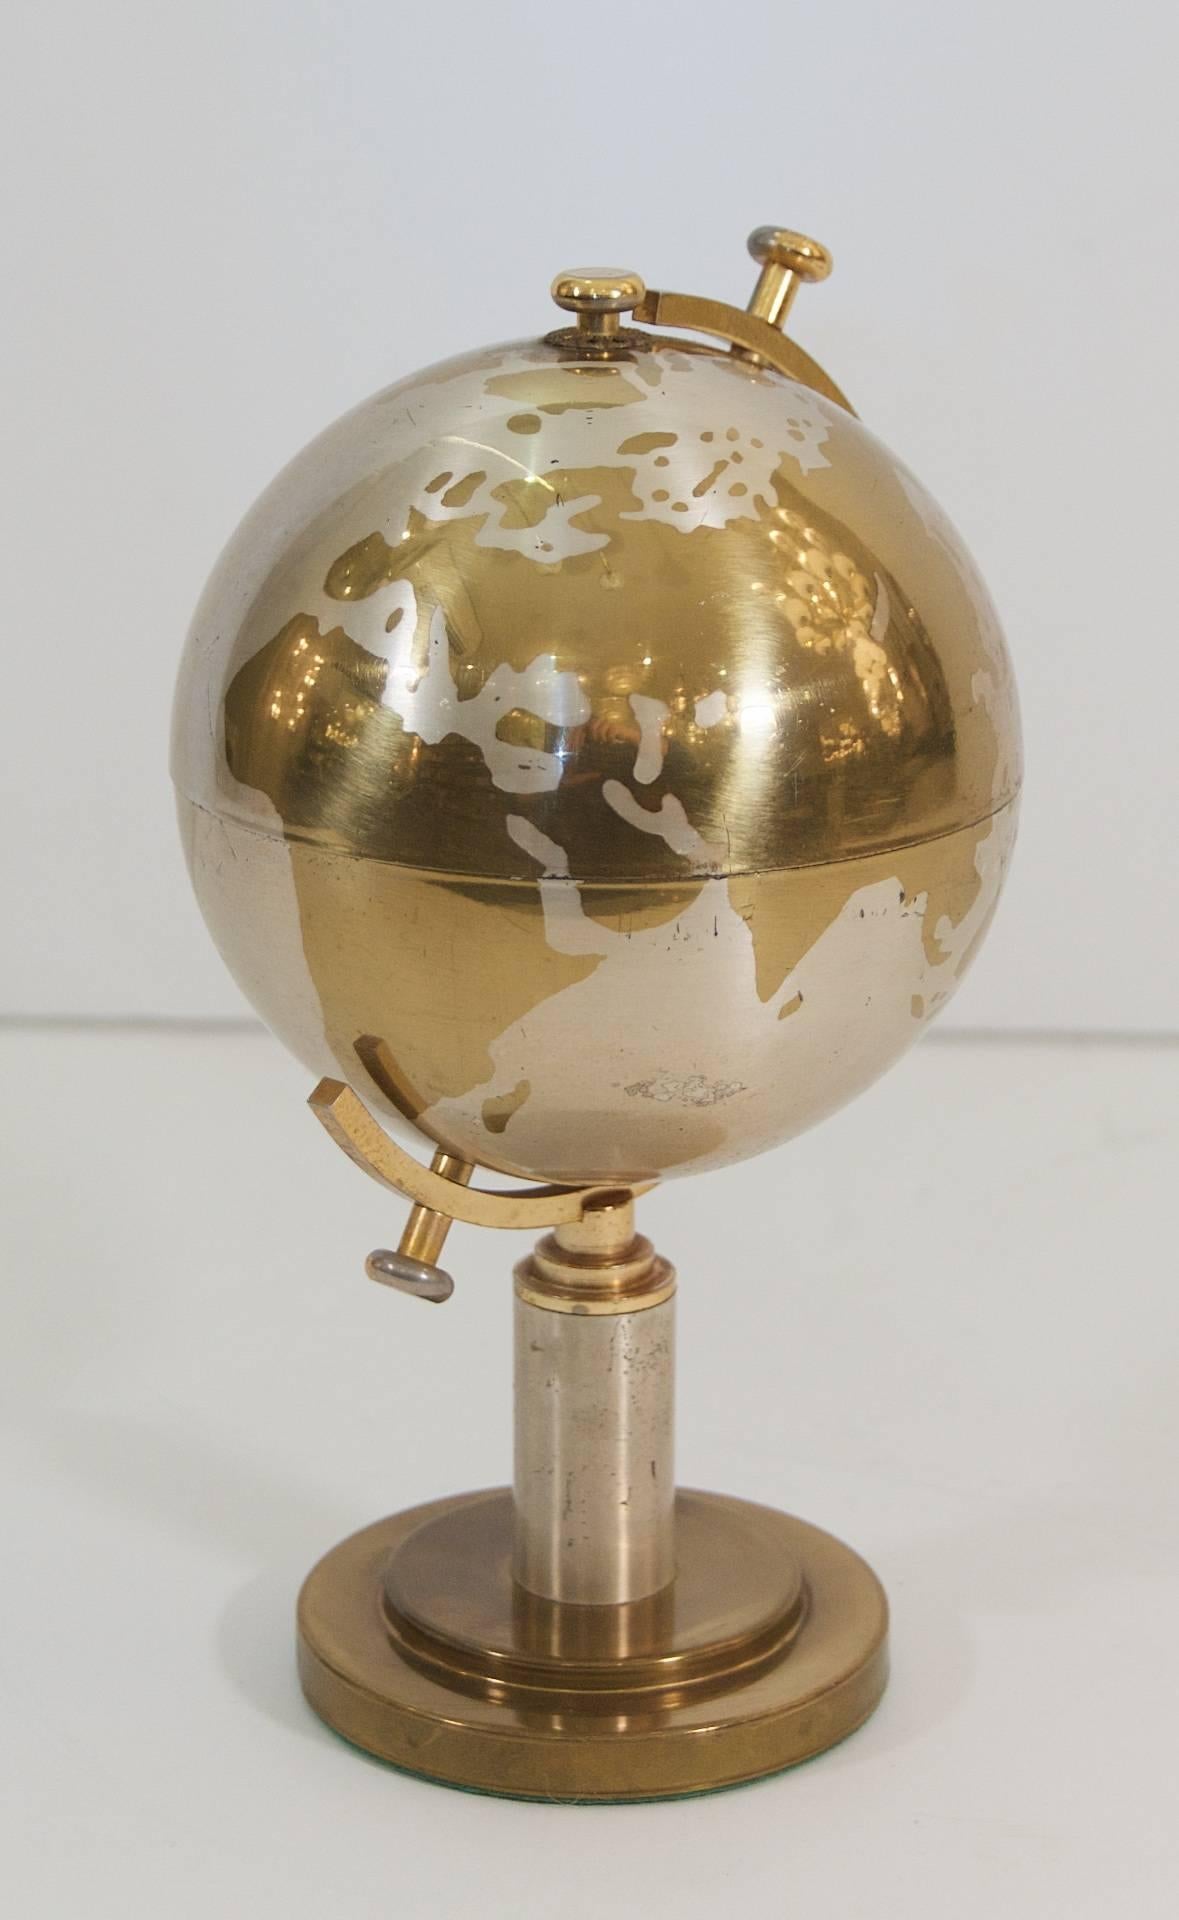 Unique steel and brass cigarette holder, the globe opens to display individual vessels for cigarettes.